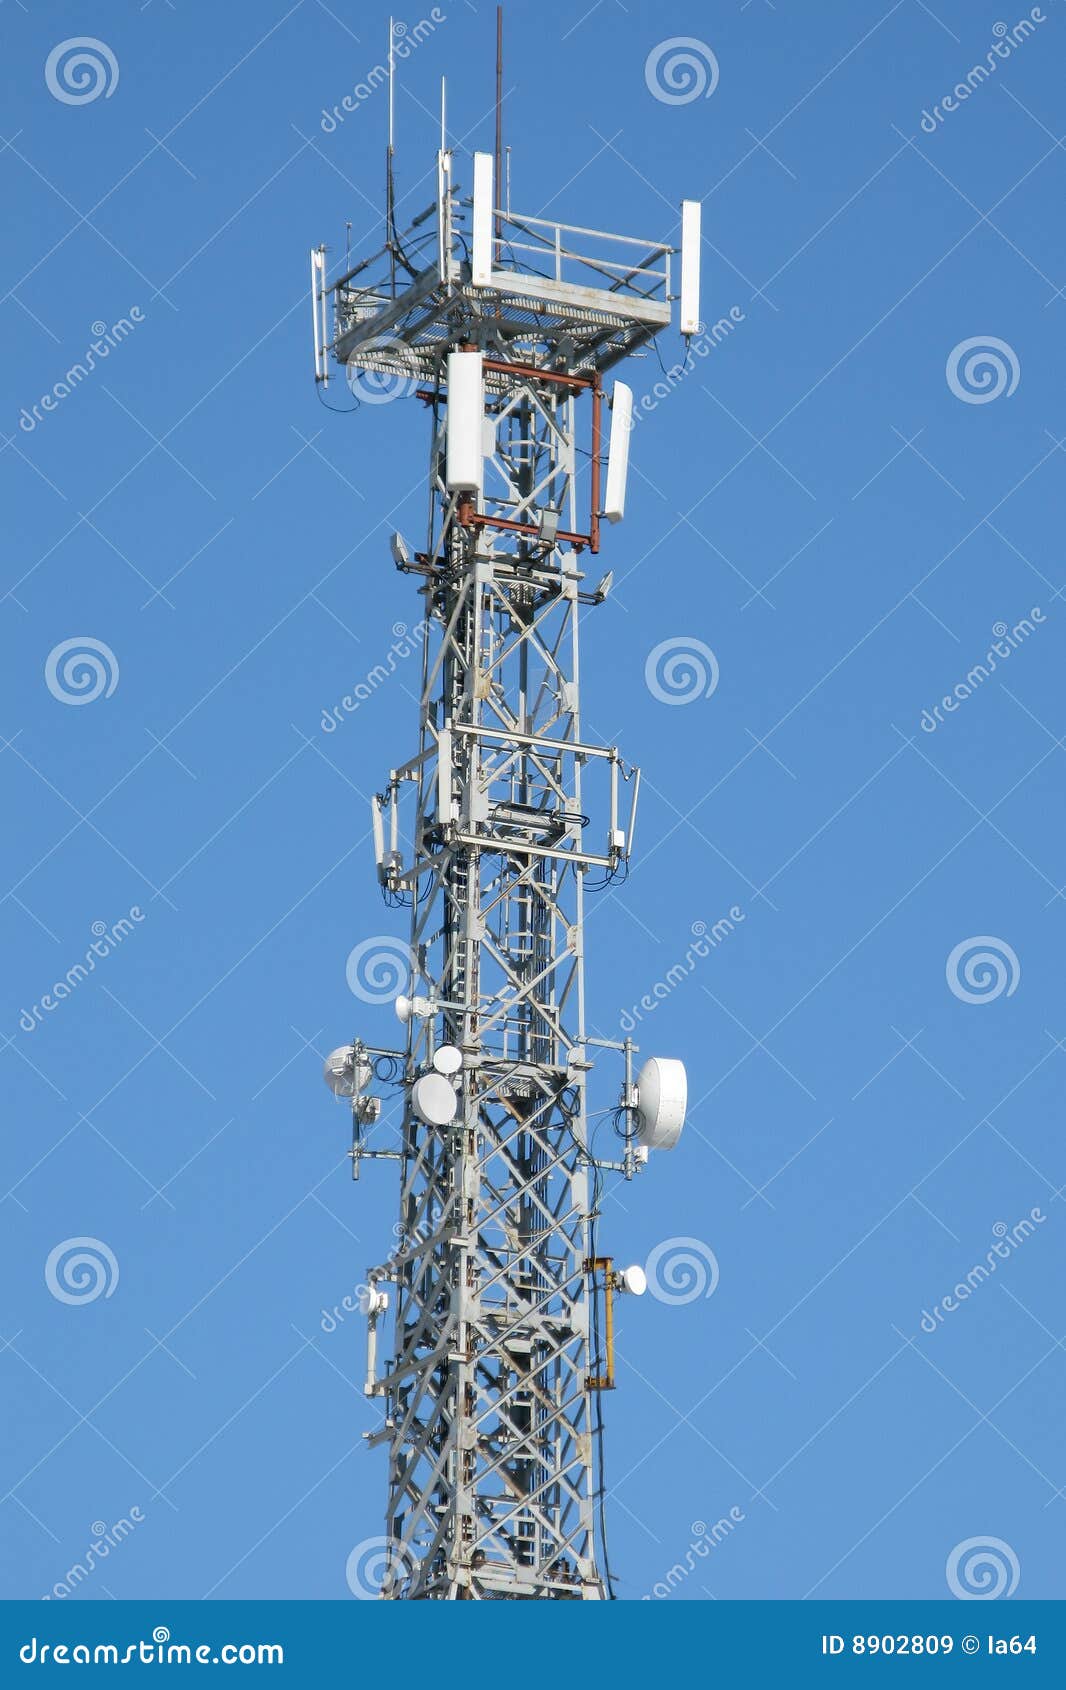 communication antenna tower and repeater equipment